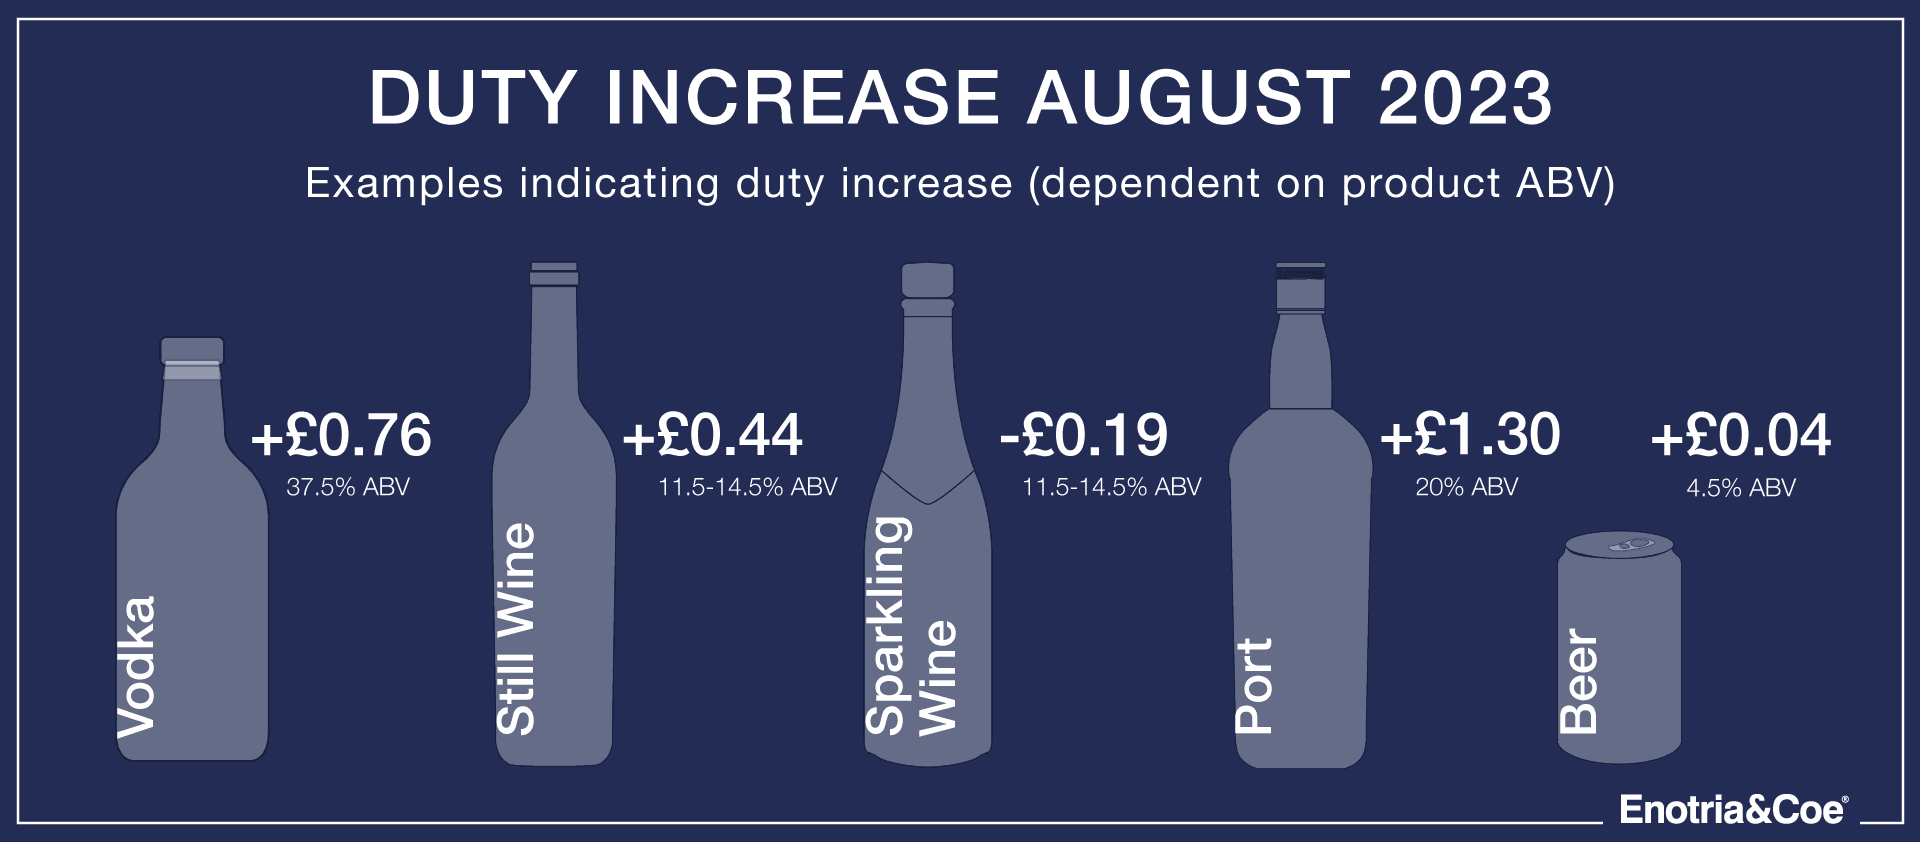 Duty increase August 2023 - examples indicating duty increase (dependent on product ABV). Vodka +£0.76, Still Wine +£0.44, Sparkling Wine -£0.19, Port +£1.30, Beer +£0.04